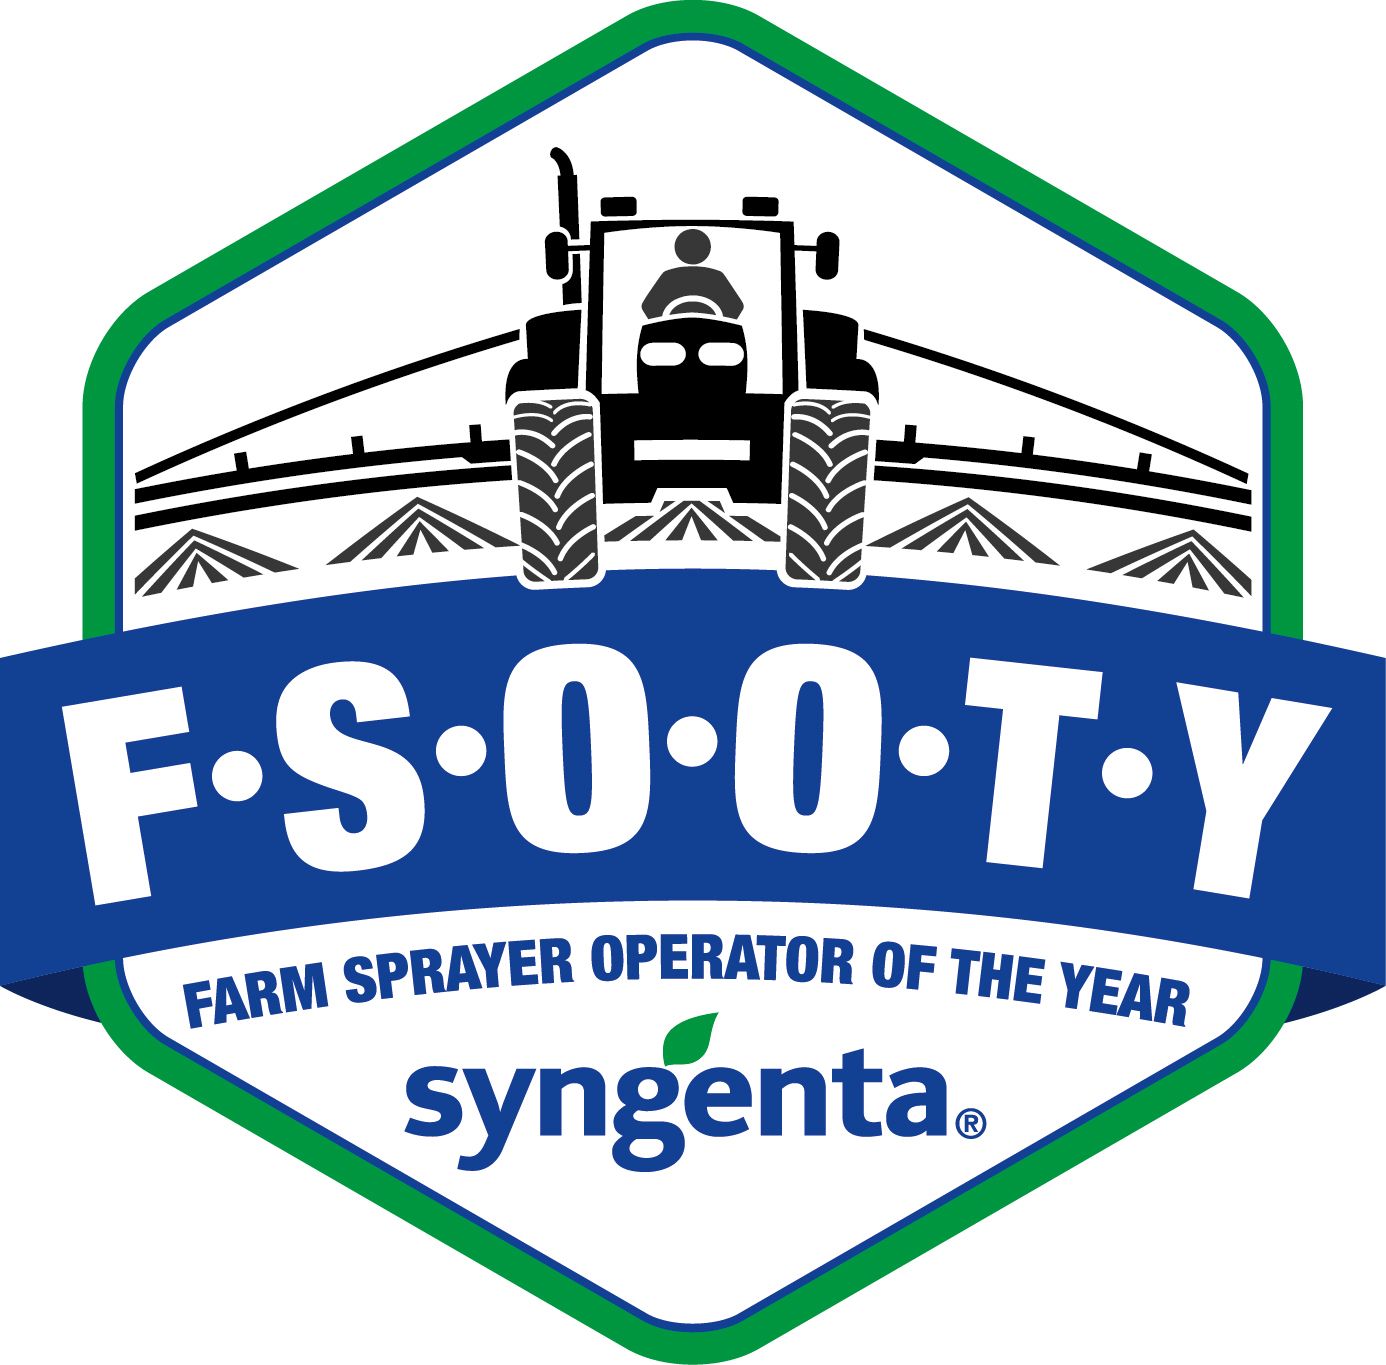 FSOOTY entries open until January